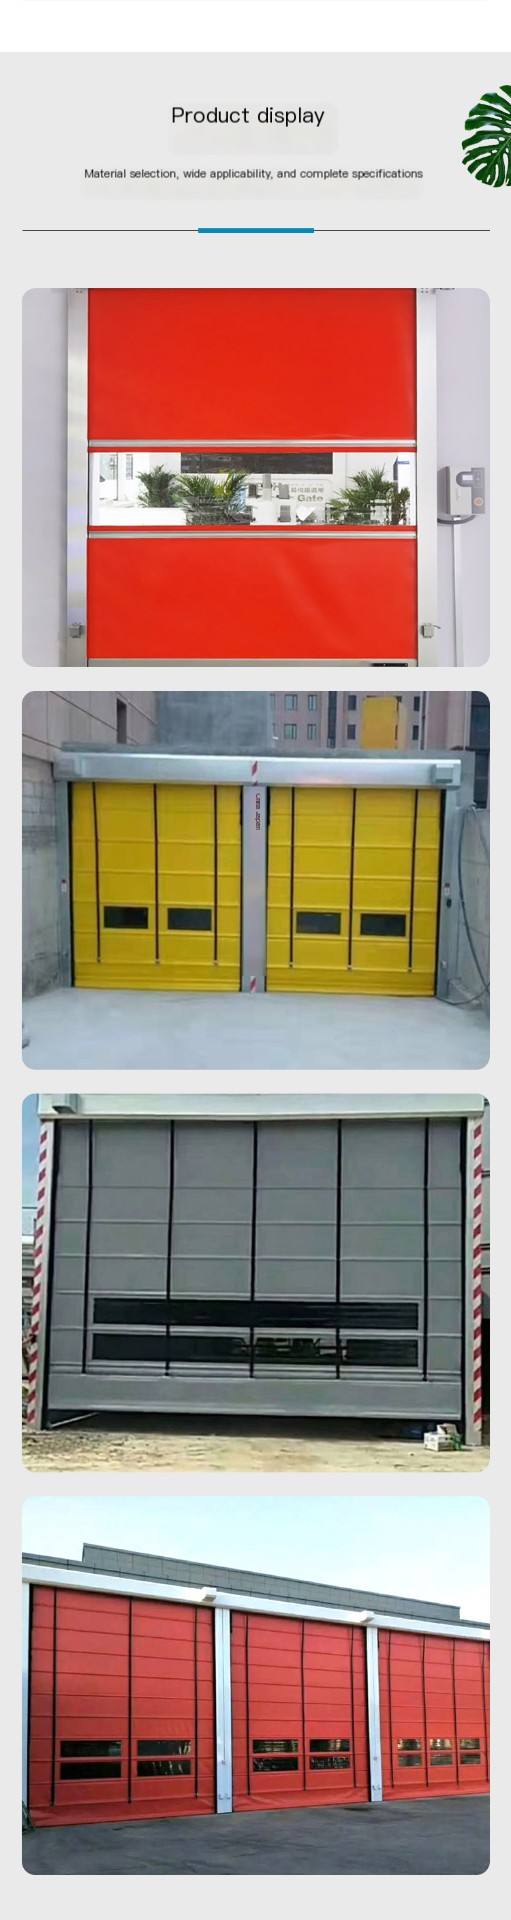 Turbine fast Roller shutter strong wind resistance red for electronic printing supermarket vibration